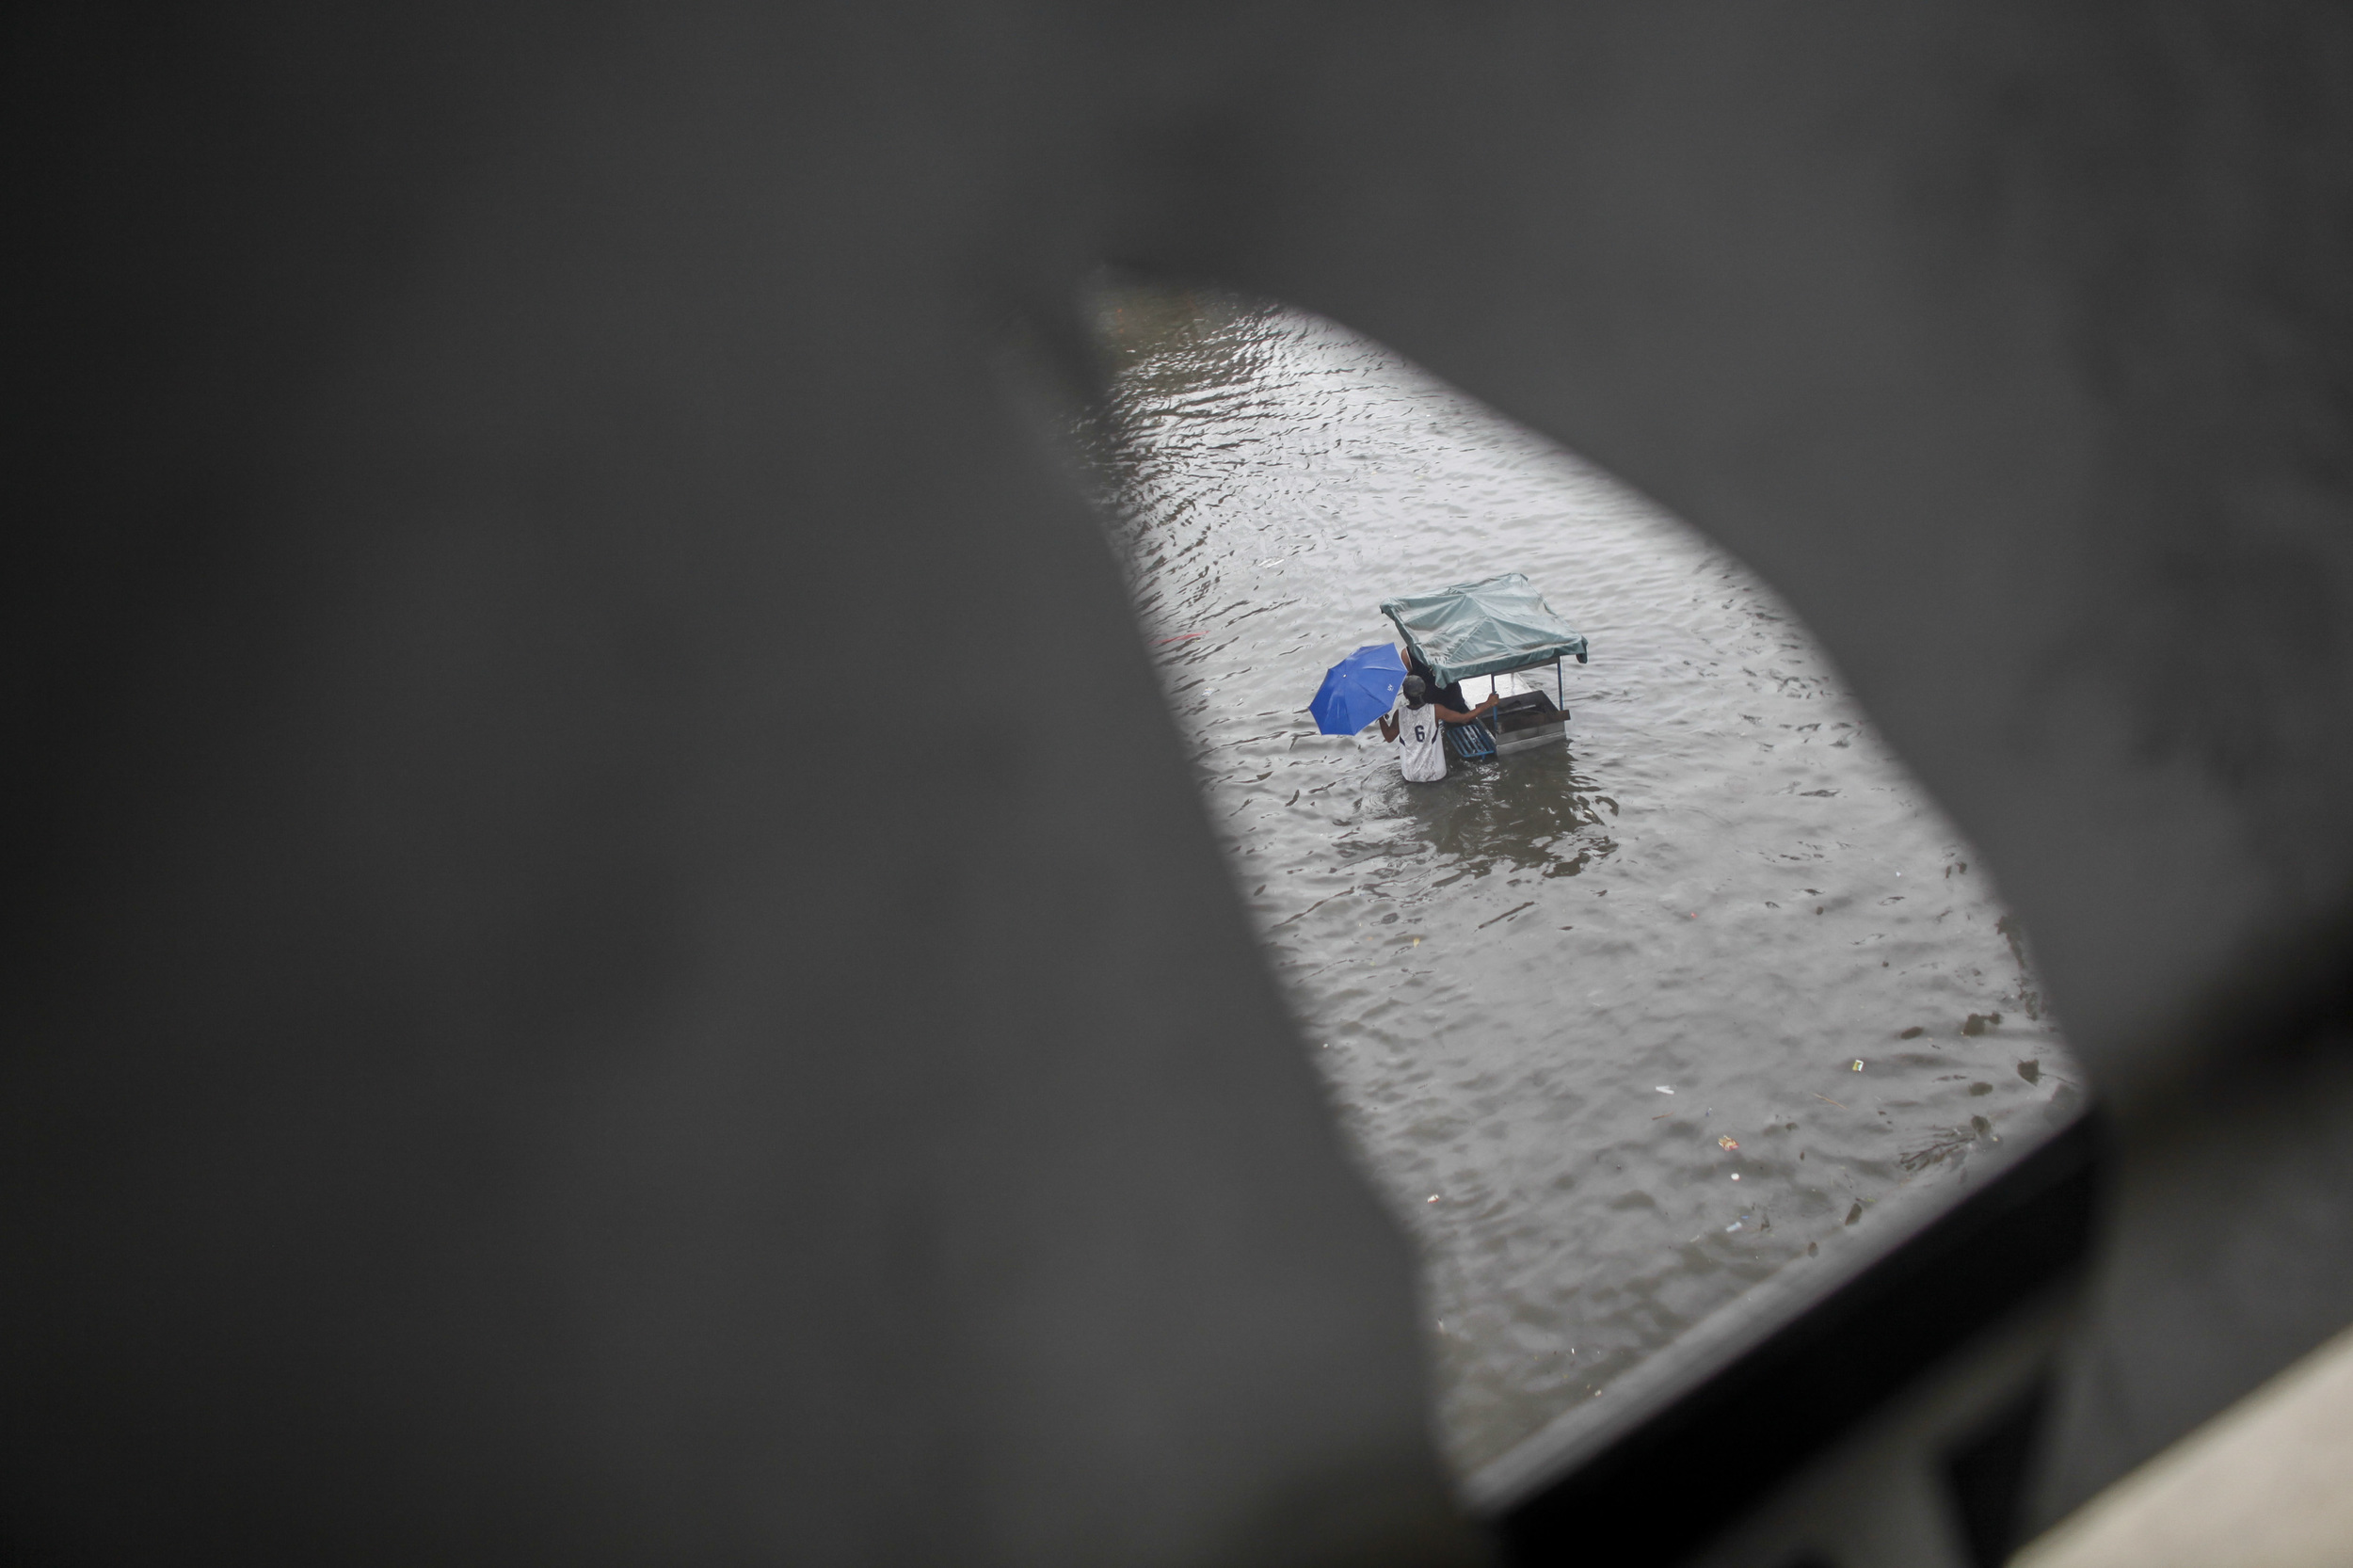  A vendor wades through floodwaters caused by monsoon rains in Sucat, Paranaque south of Metro Manila August 19, 2013. Heavy rain in the Philippine capital forced the closure of government offices, schools, banks and most private companies on Monday,